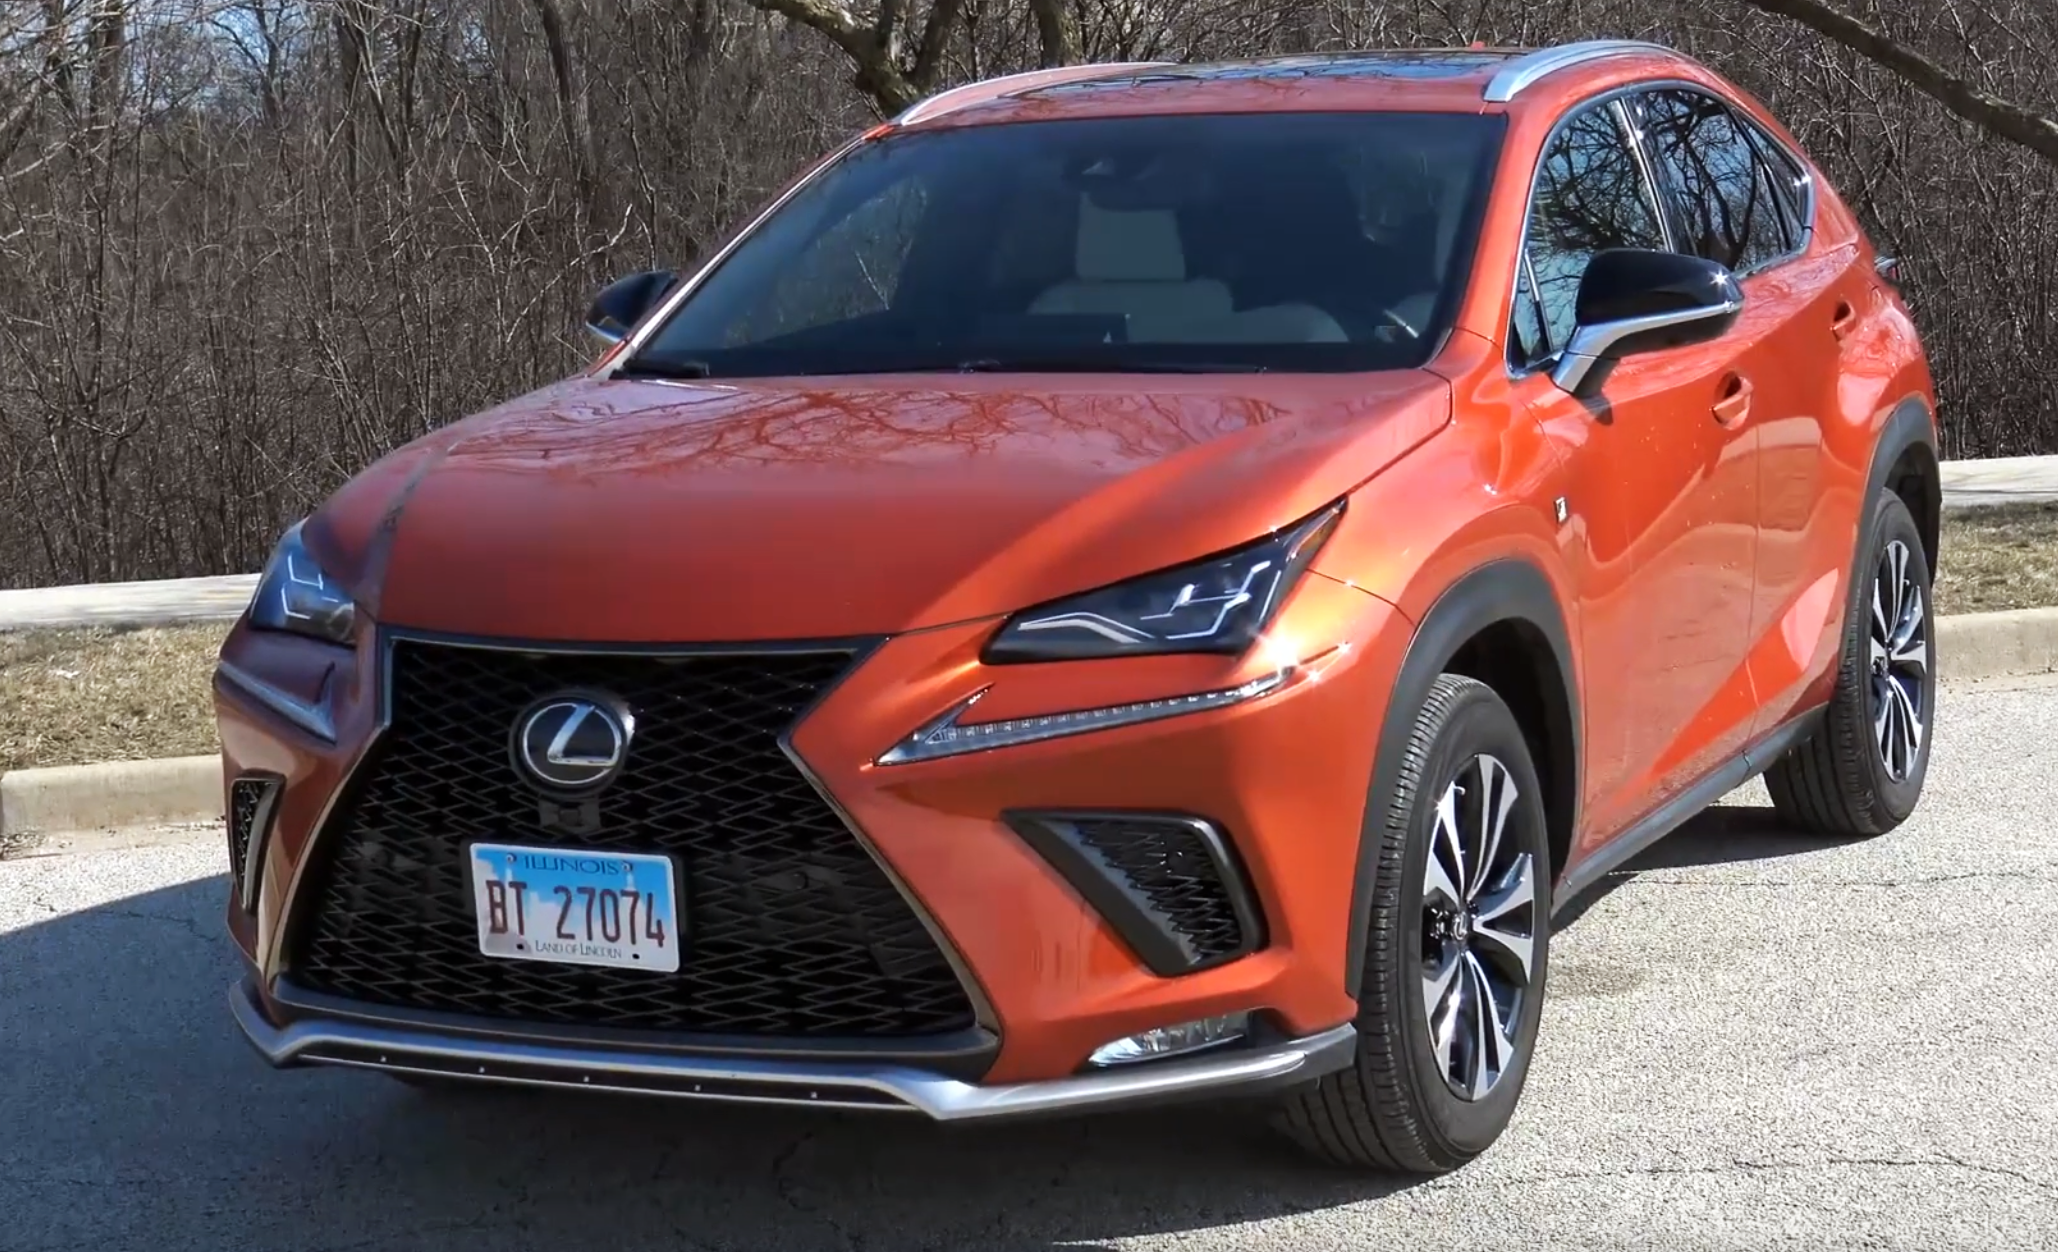 Steve and Johnnie Road Test: 2020 Lexus NX 300 F Sport | The Daily Drive |  Consumer Guide® The Daily Drive | Consumer Guide®